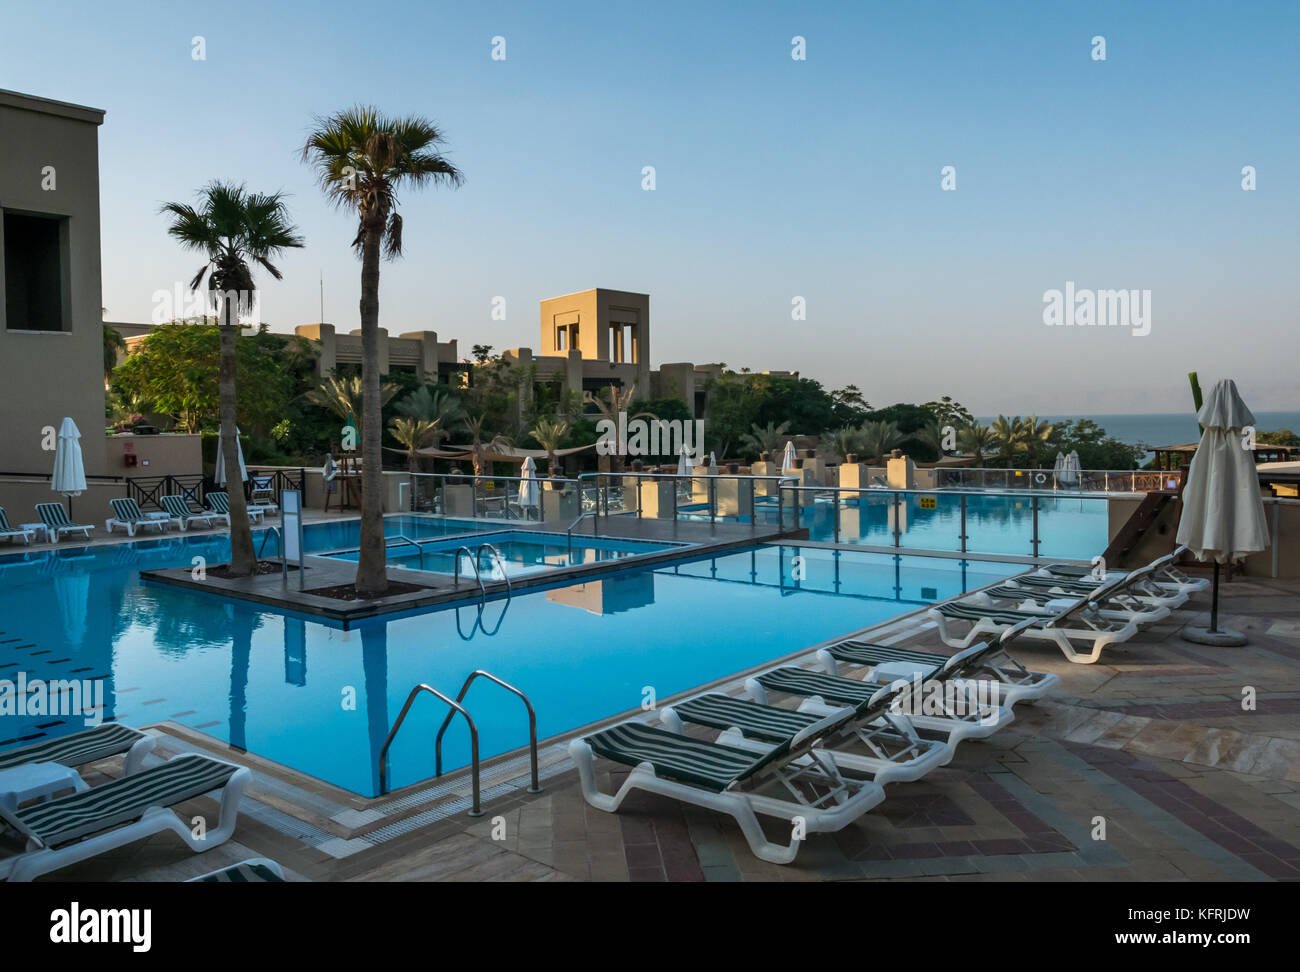 Early morning at the outdoor swimming pool complex, Holiday Inn Dead Sea beach resort, with no one in the pool, Jordan, Middle East Stock Photo